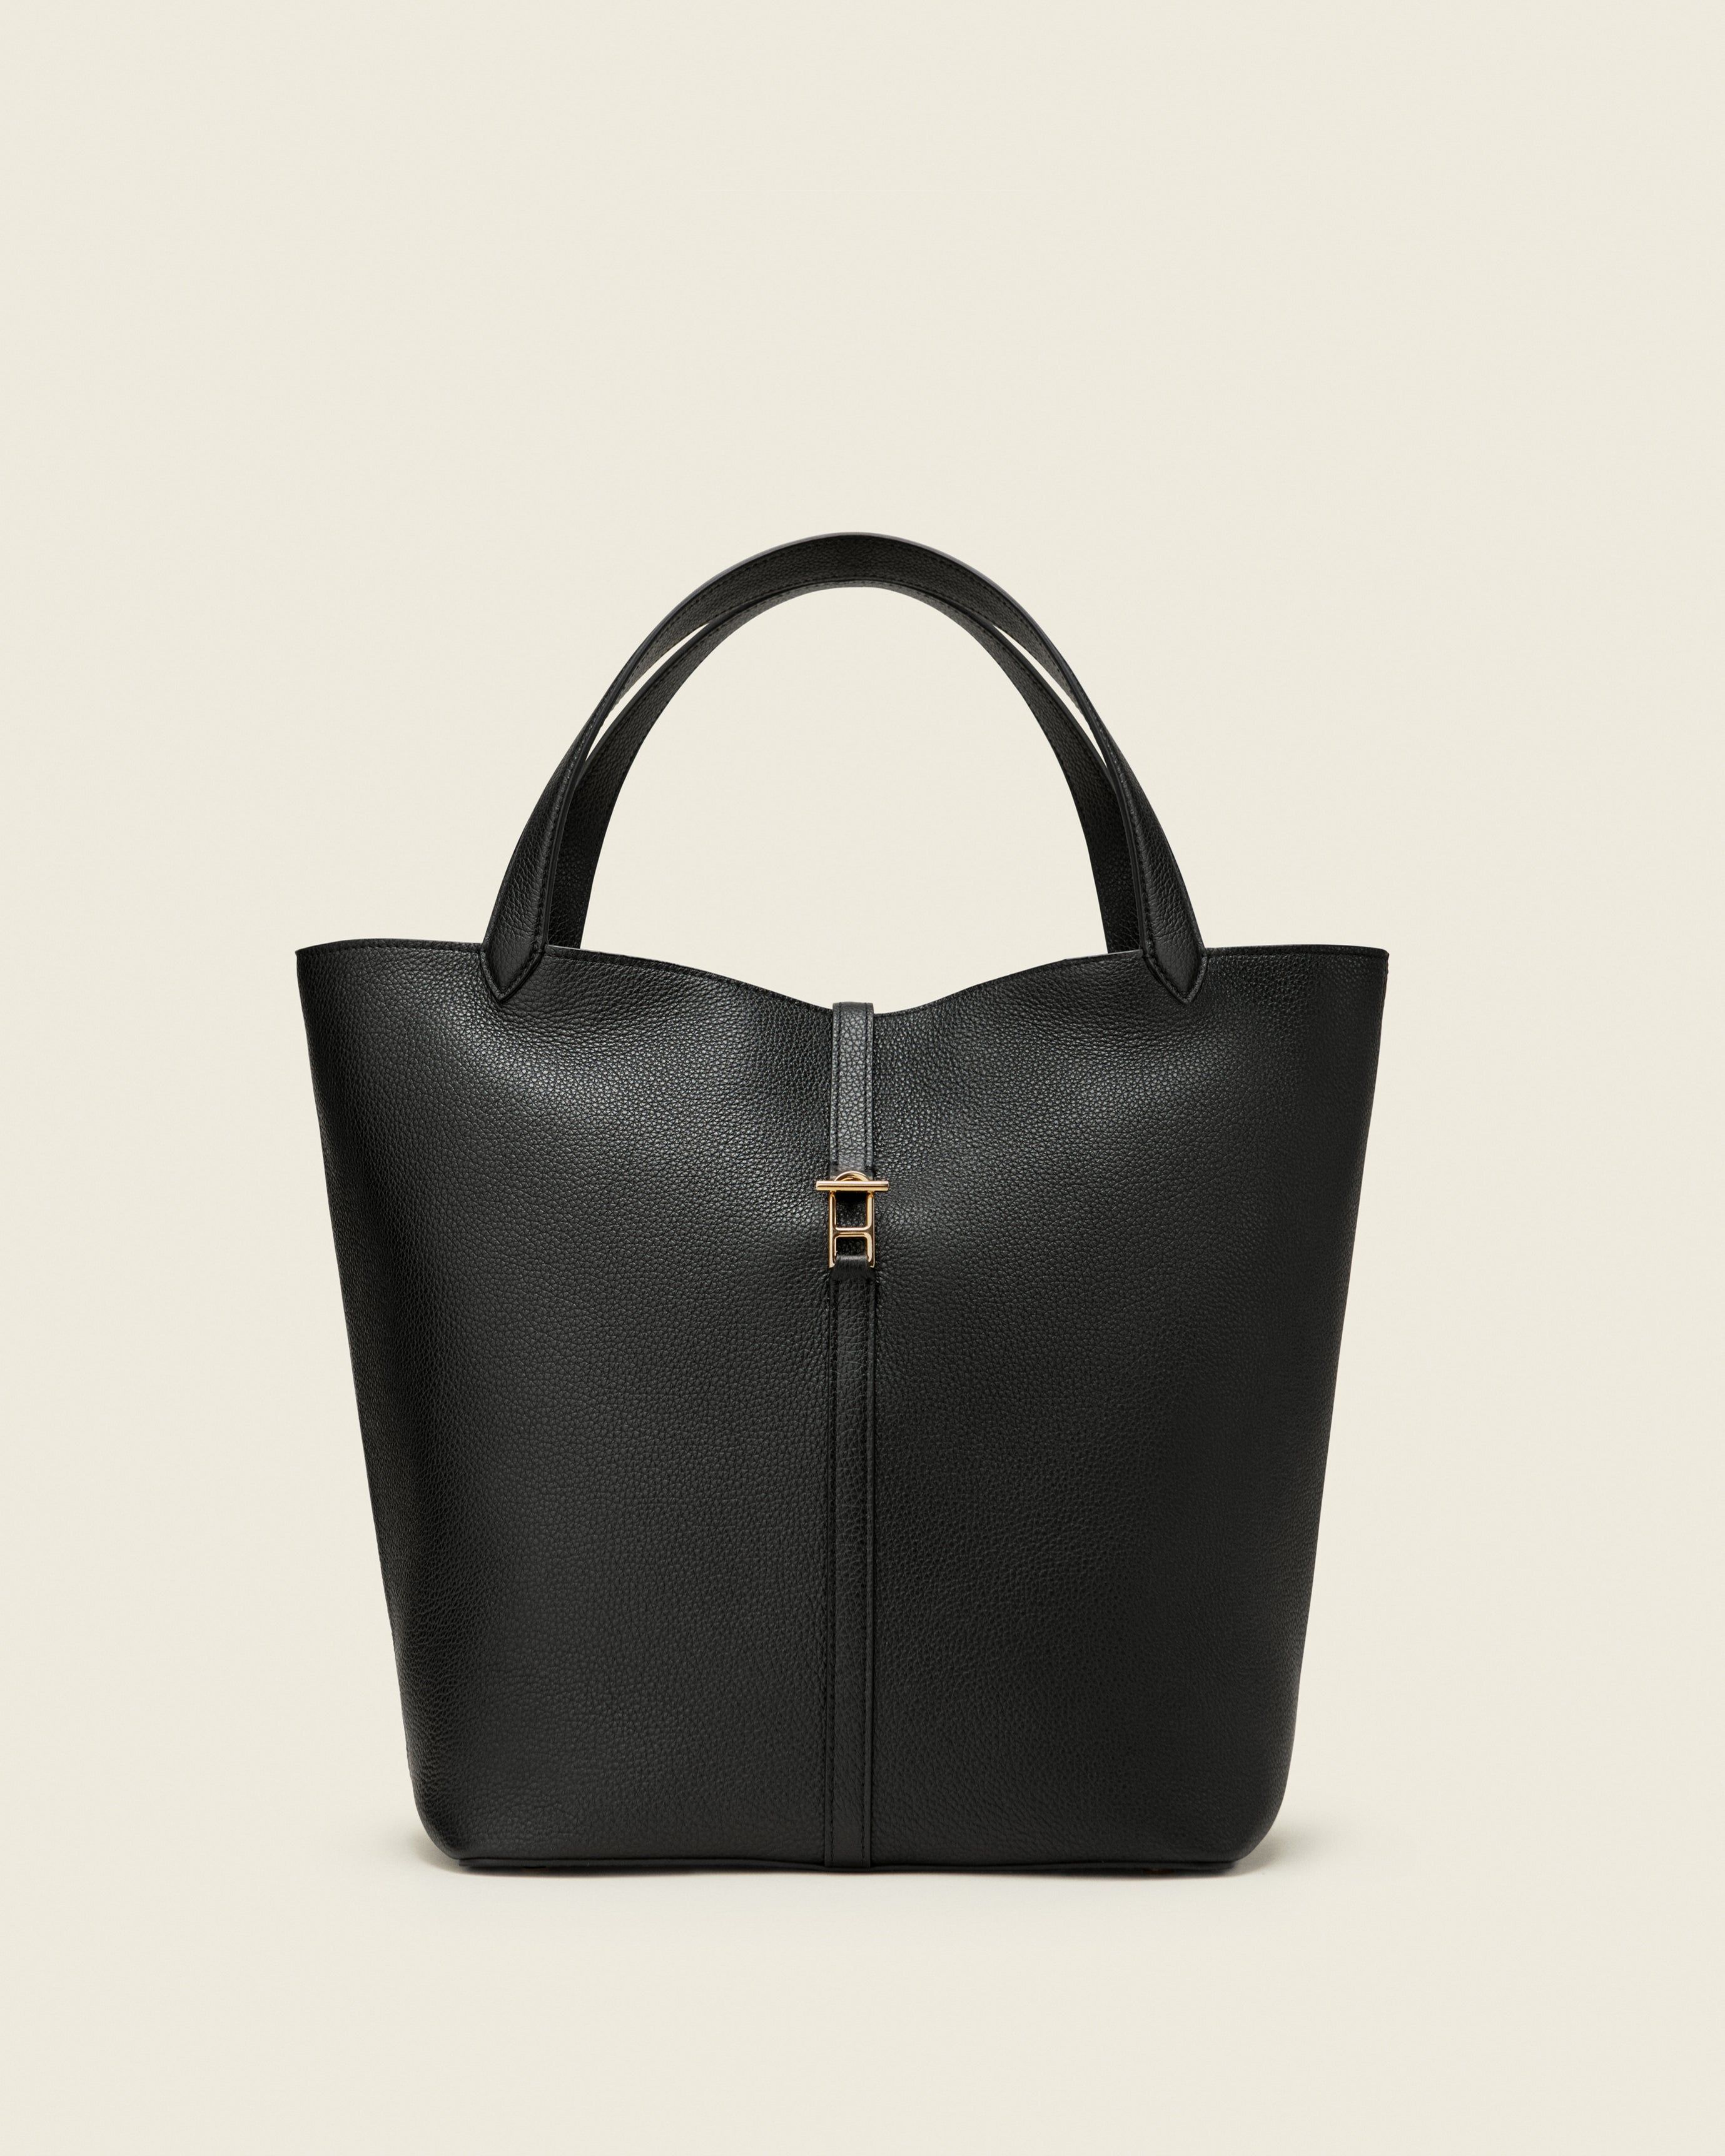 21 Best Leather Totes: Leather Tote Bags That Carry It All